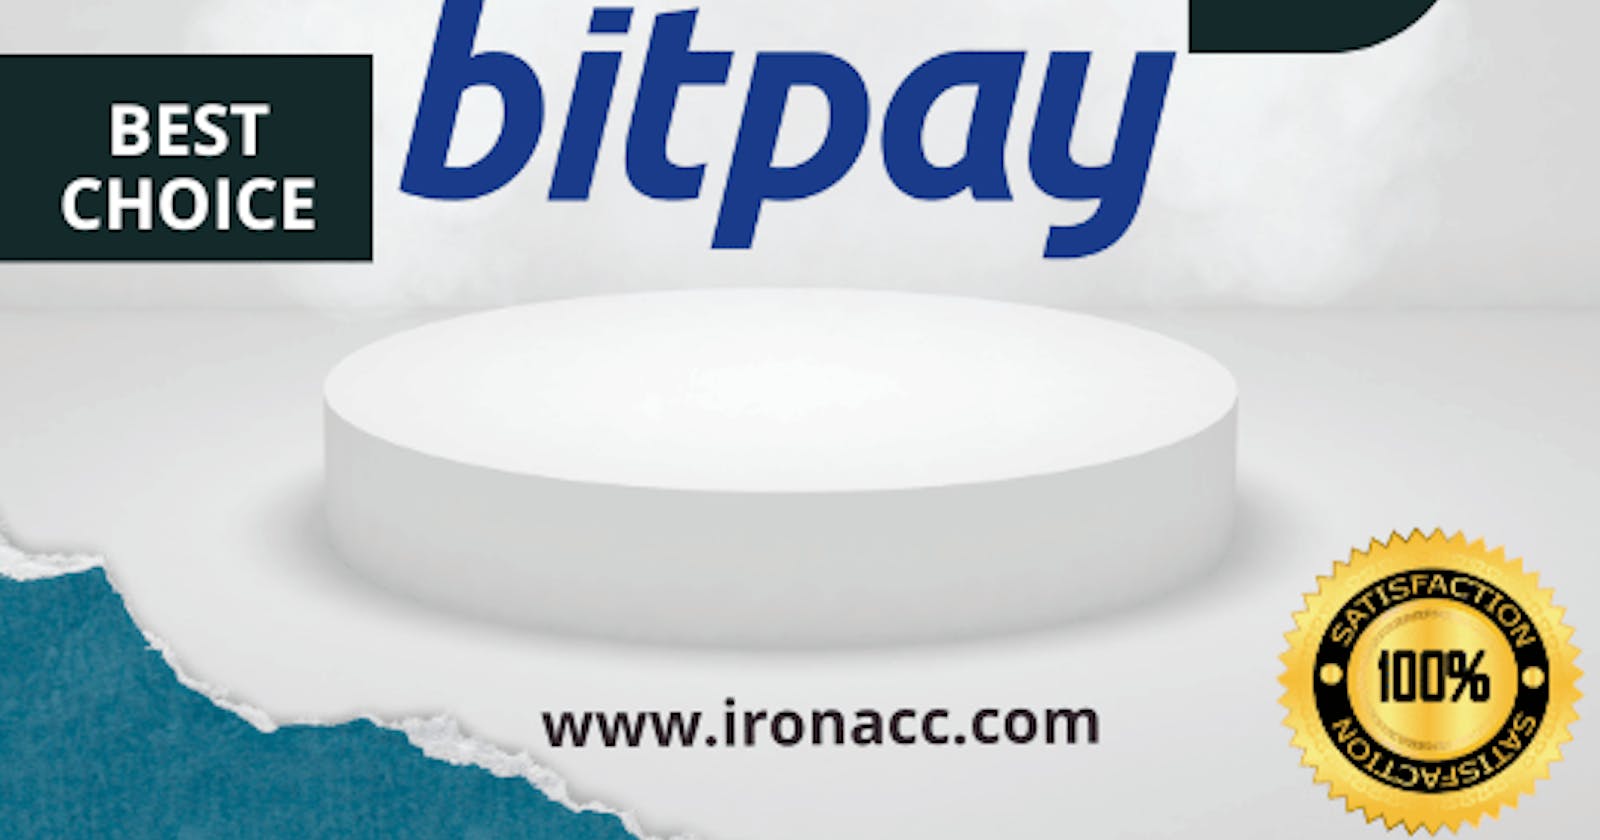 Ready to Use: Purchase a Verified BitPay Account for Instant Access